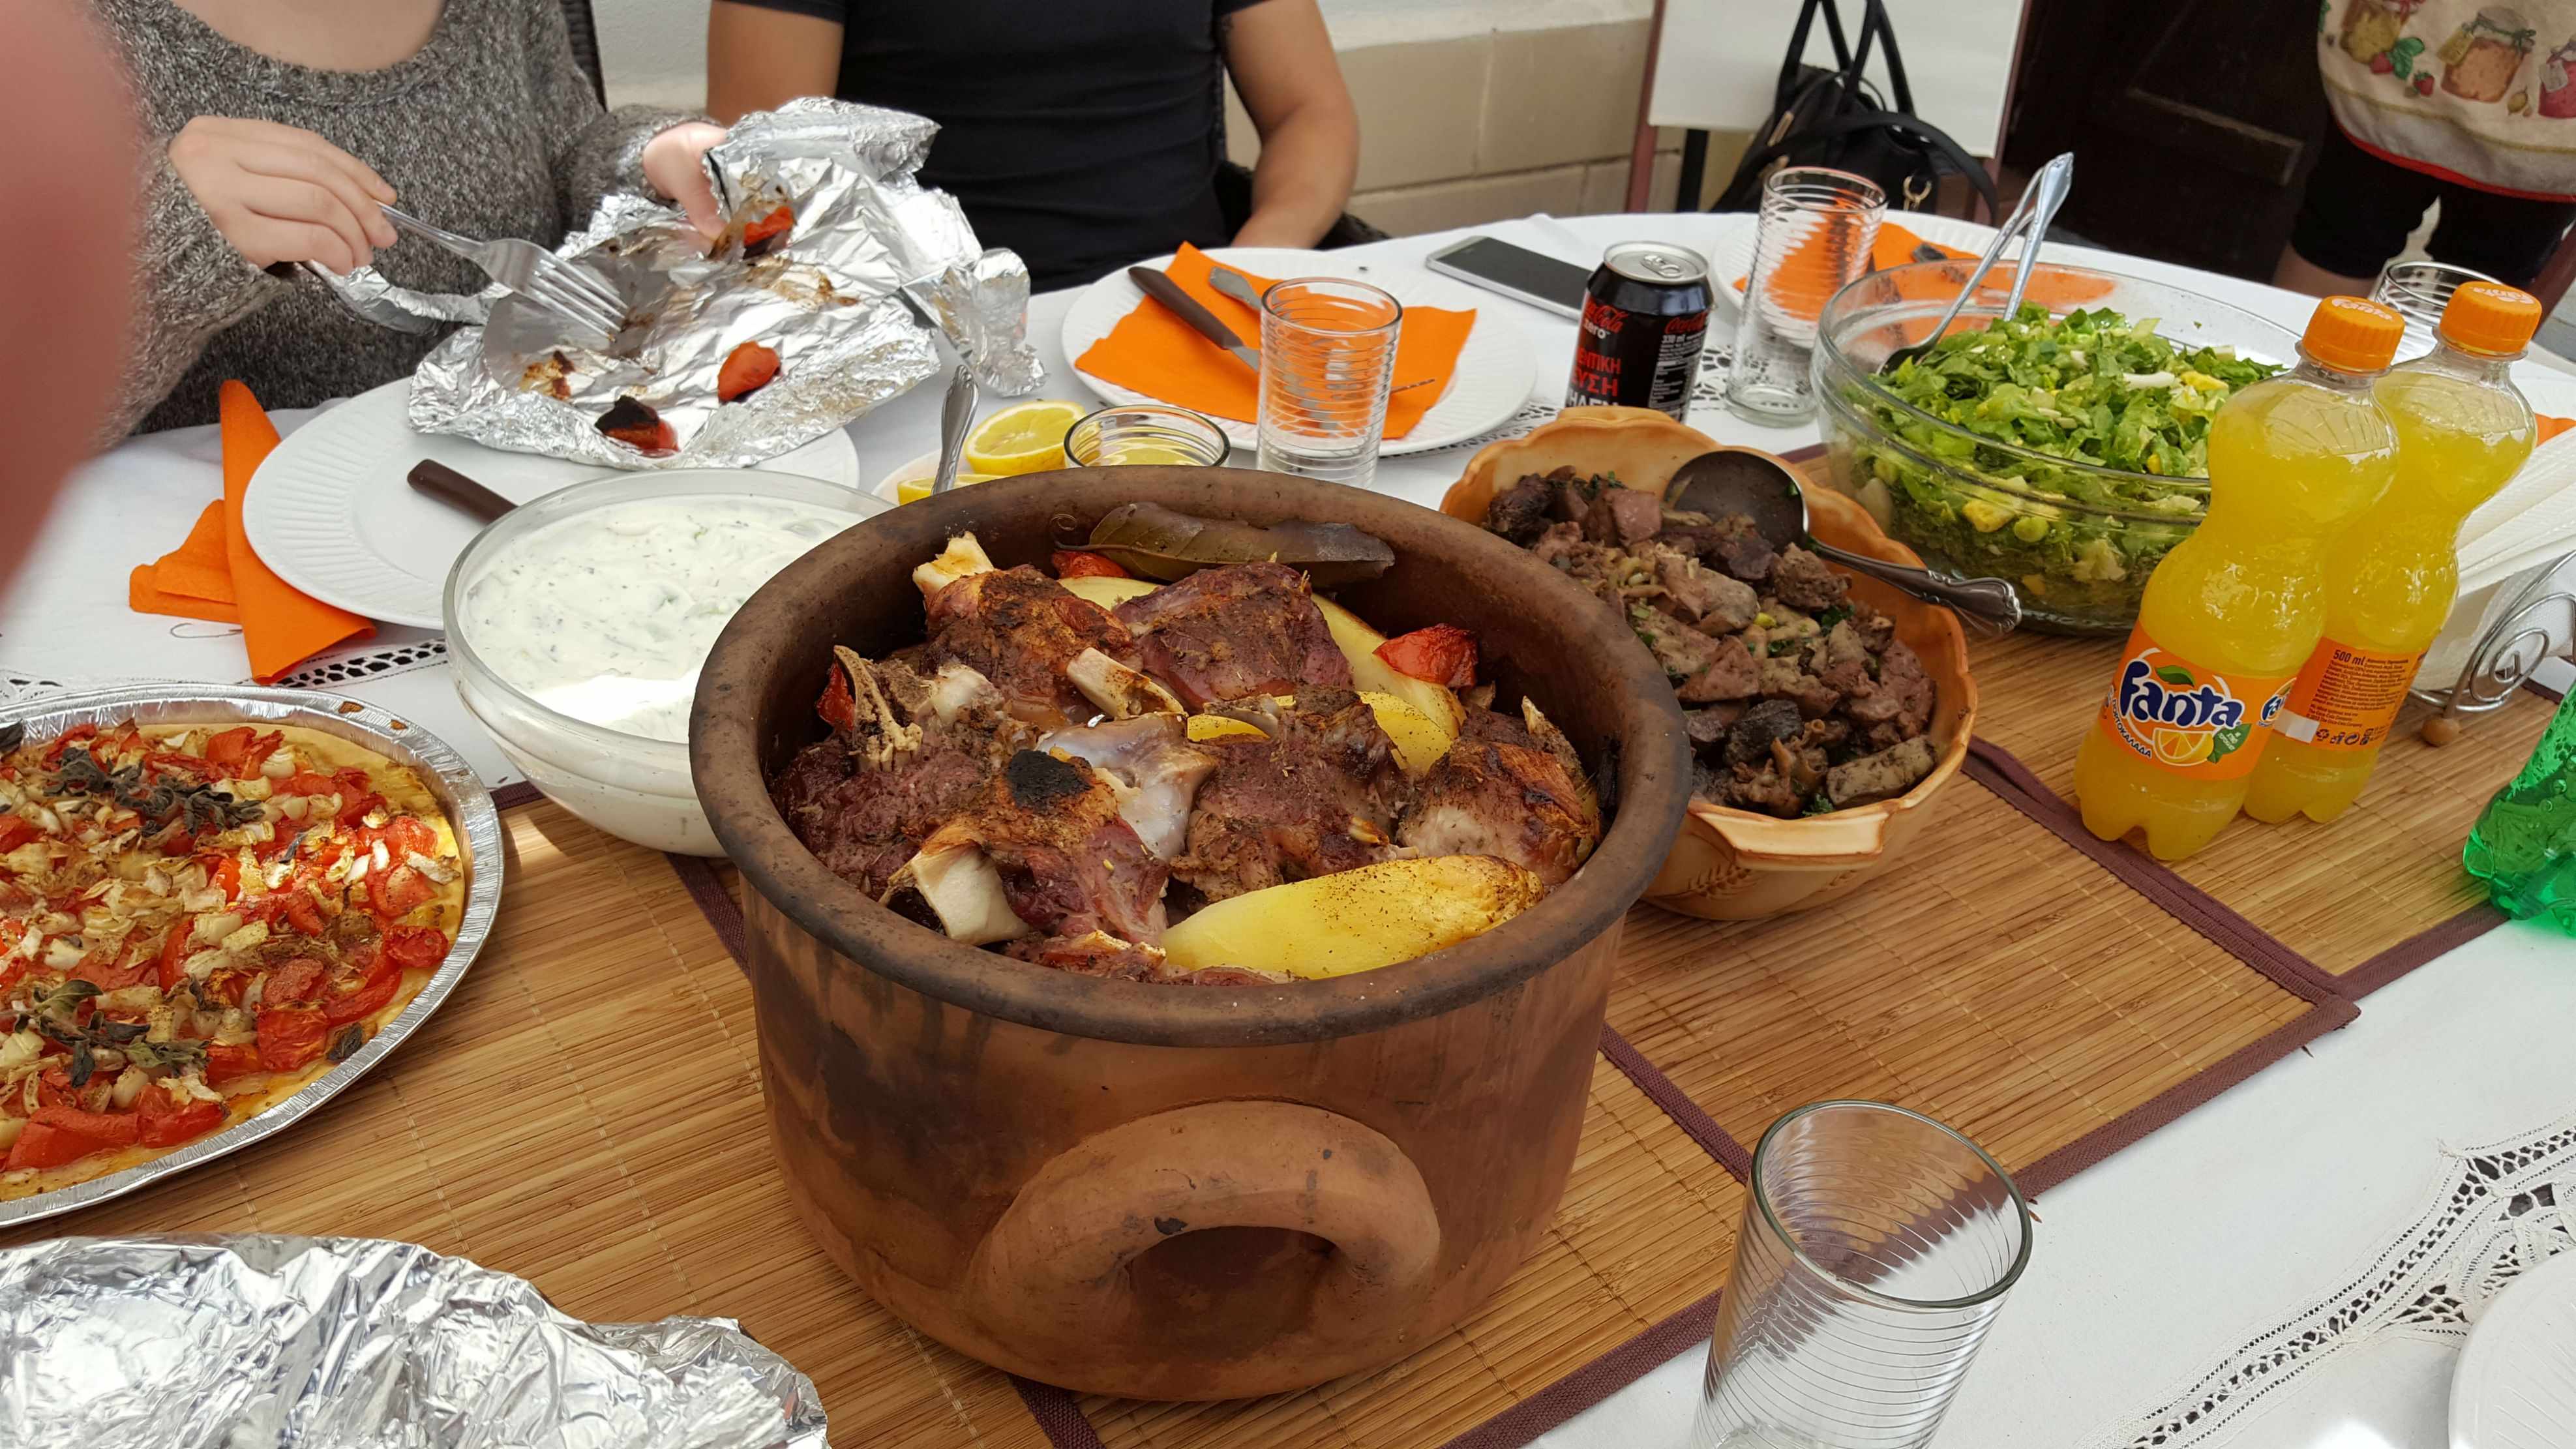 “PSITO” – Roasted meat & potatoes in clay pot